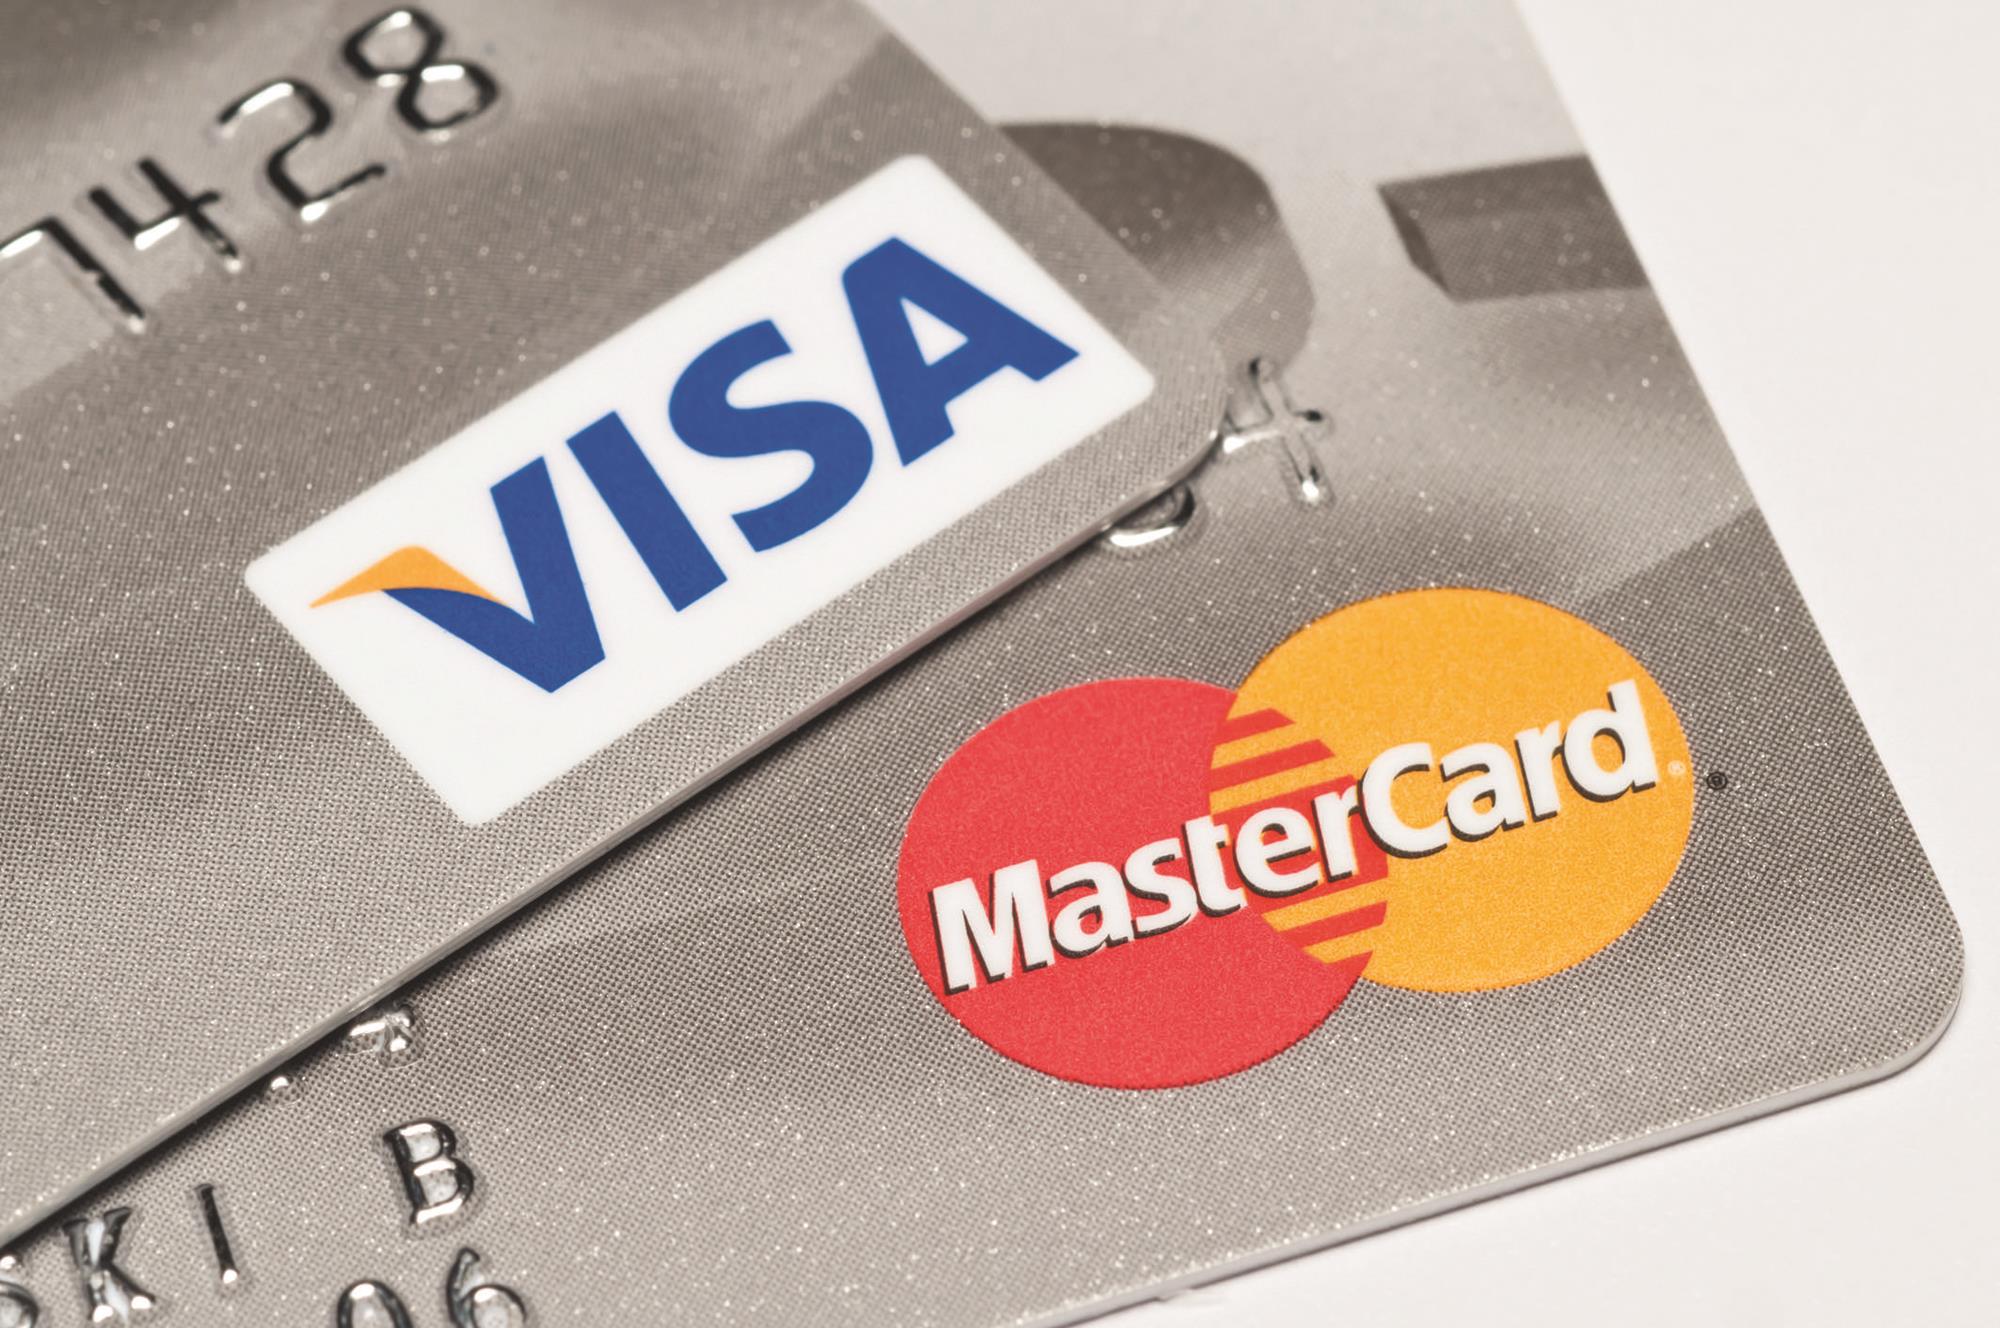 Nigerian Bank Cards (Visa, Verve And Master) To Be Barred Internationally From March 2018 - Find Out Why!